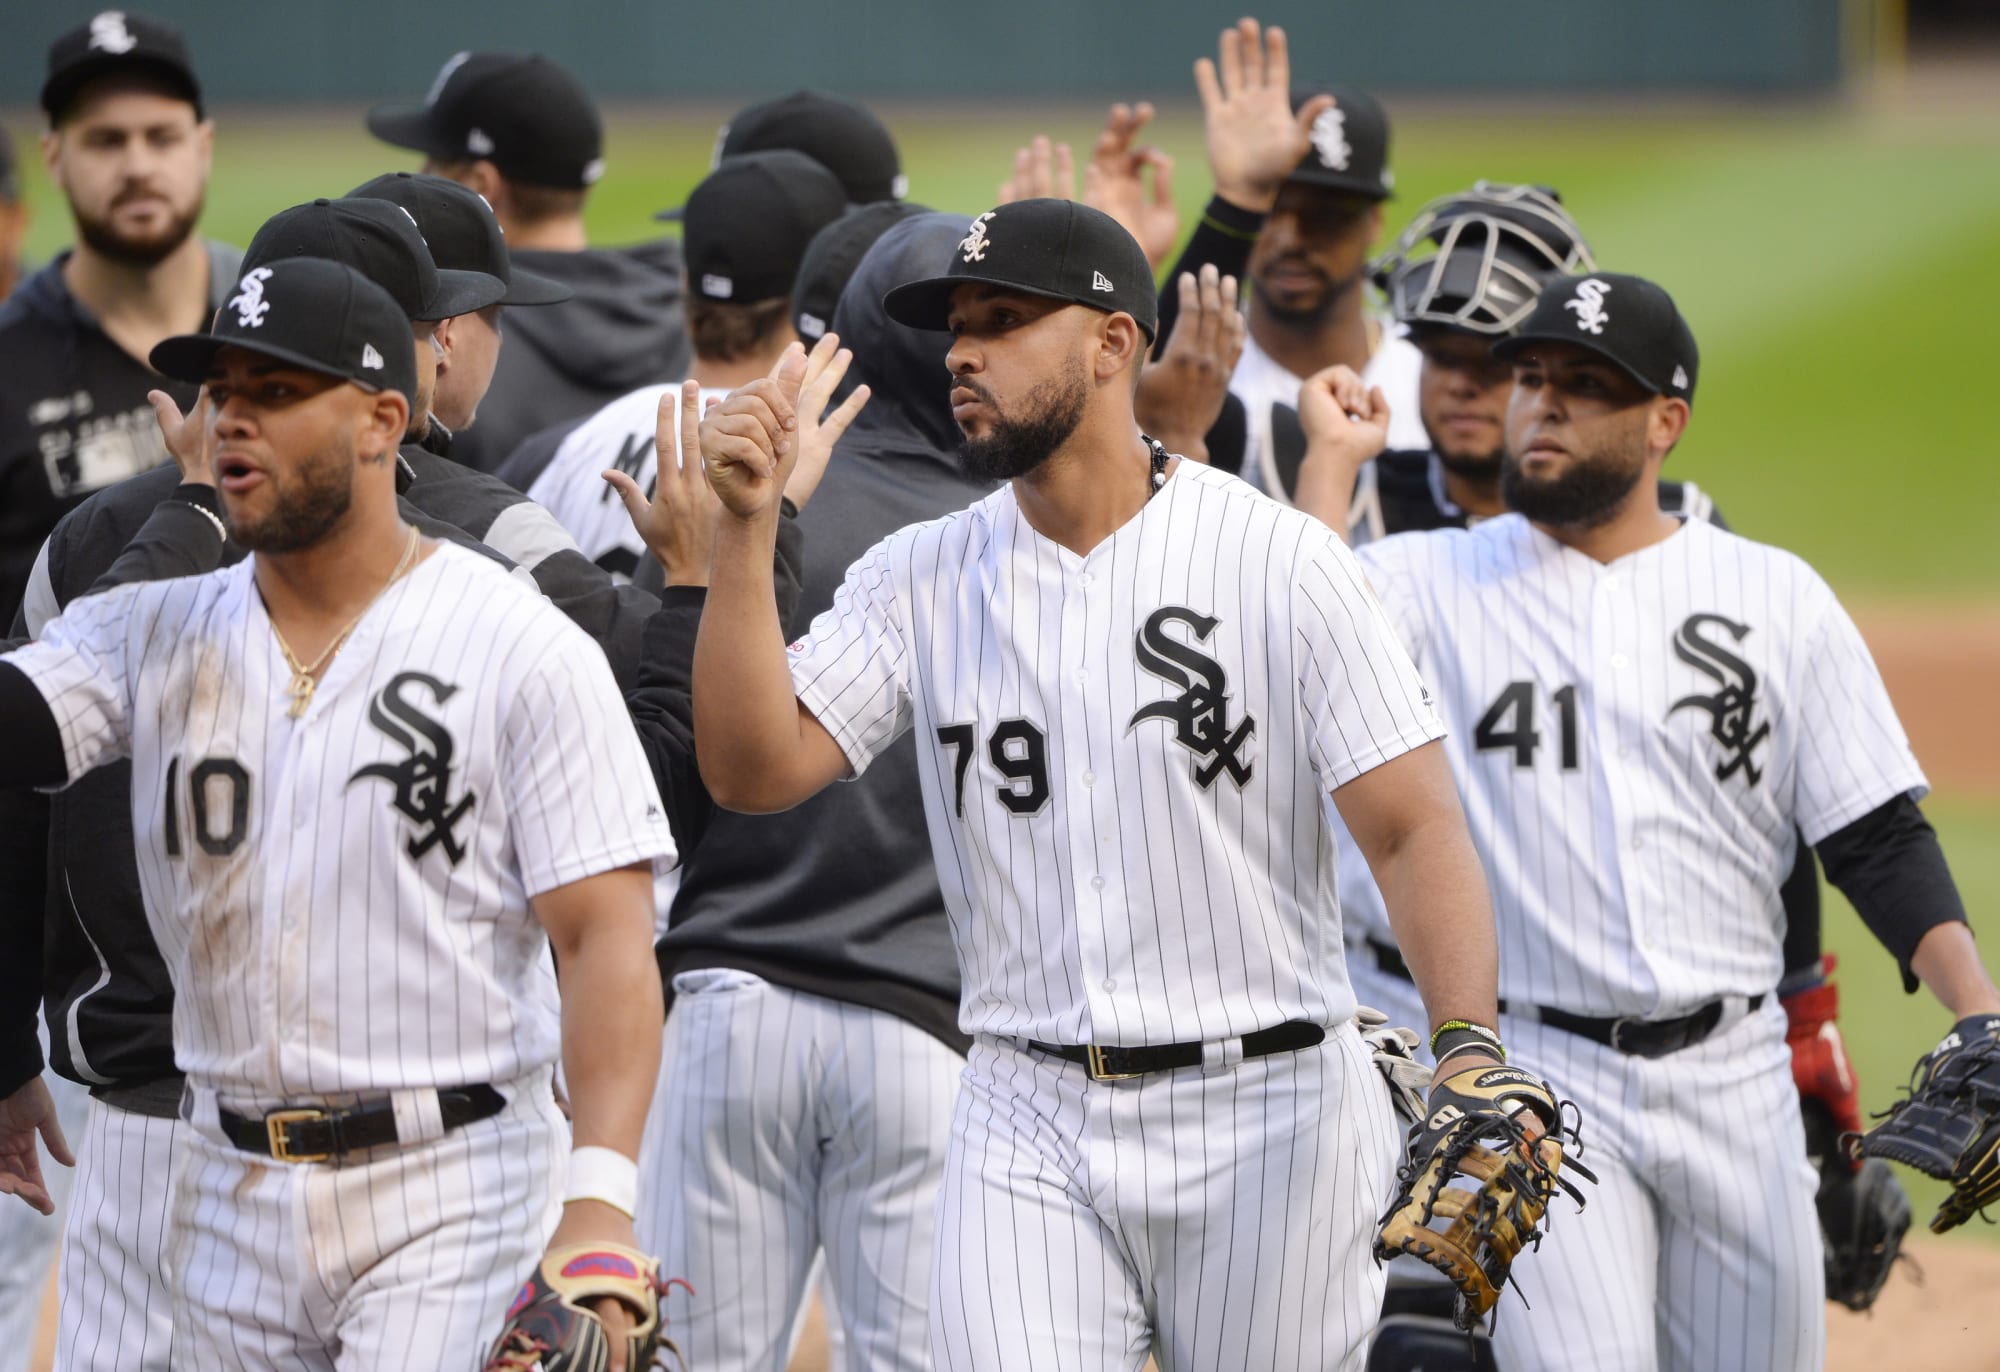 Chicago White Sox poised to be MLB's team of the future